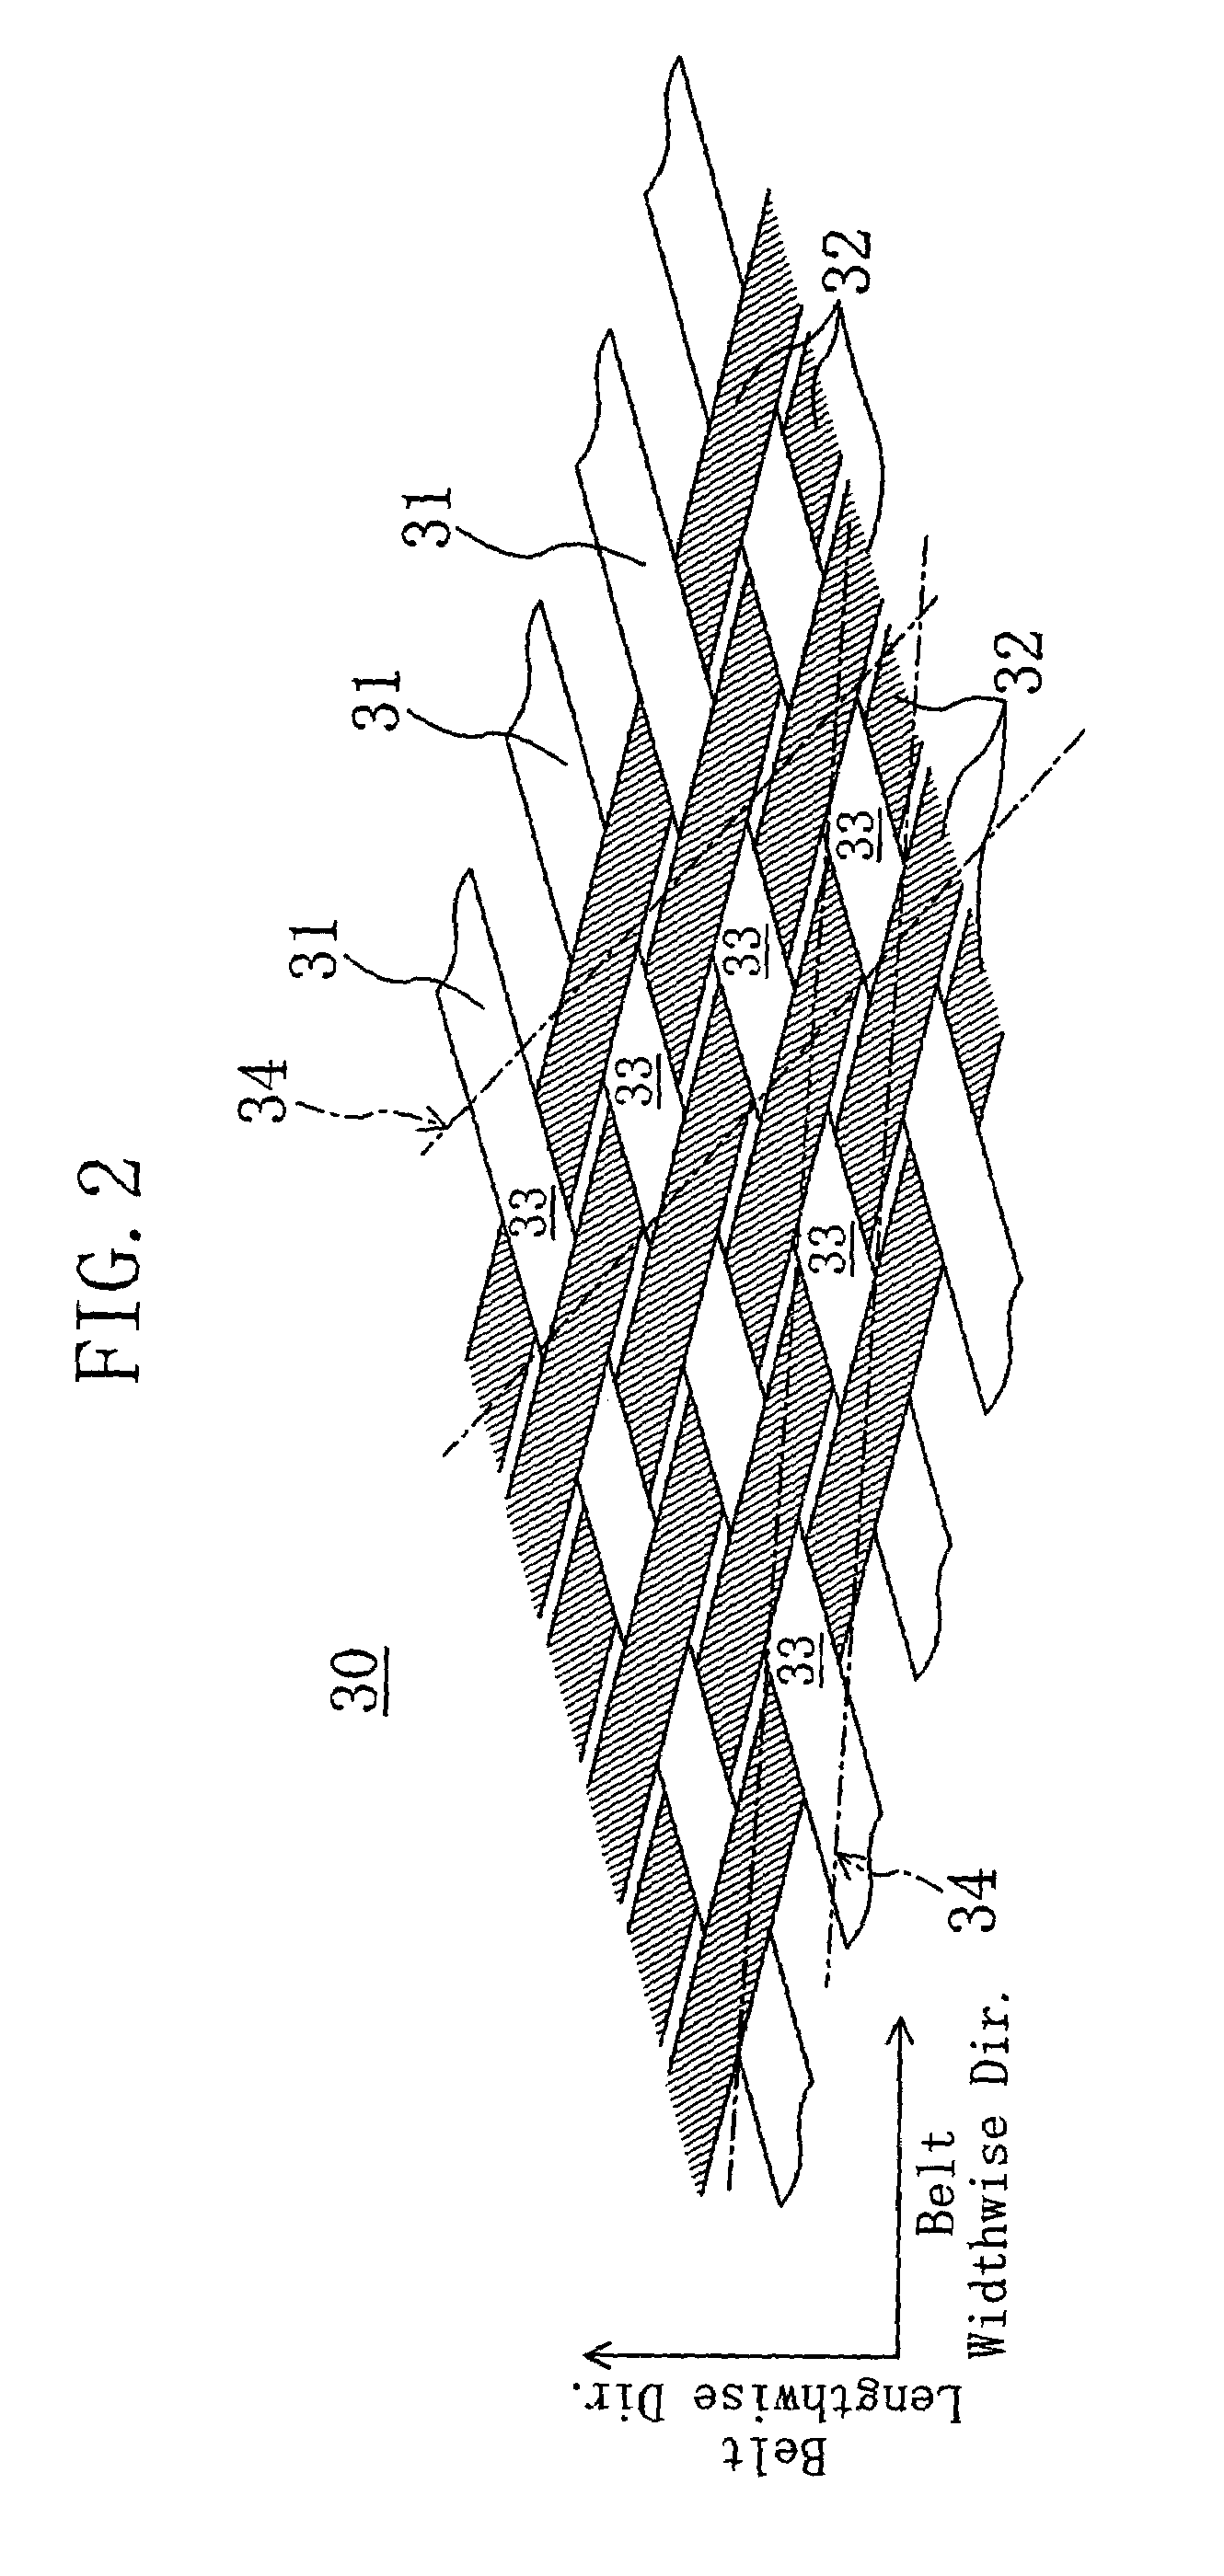 Power transmission belt and belt drive system with the same